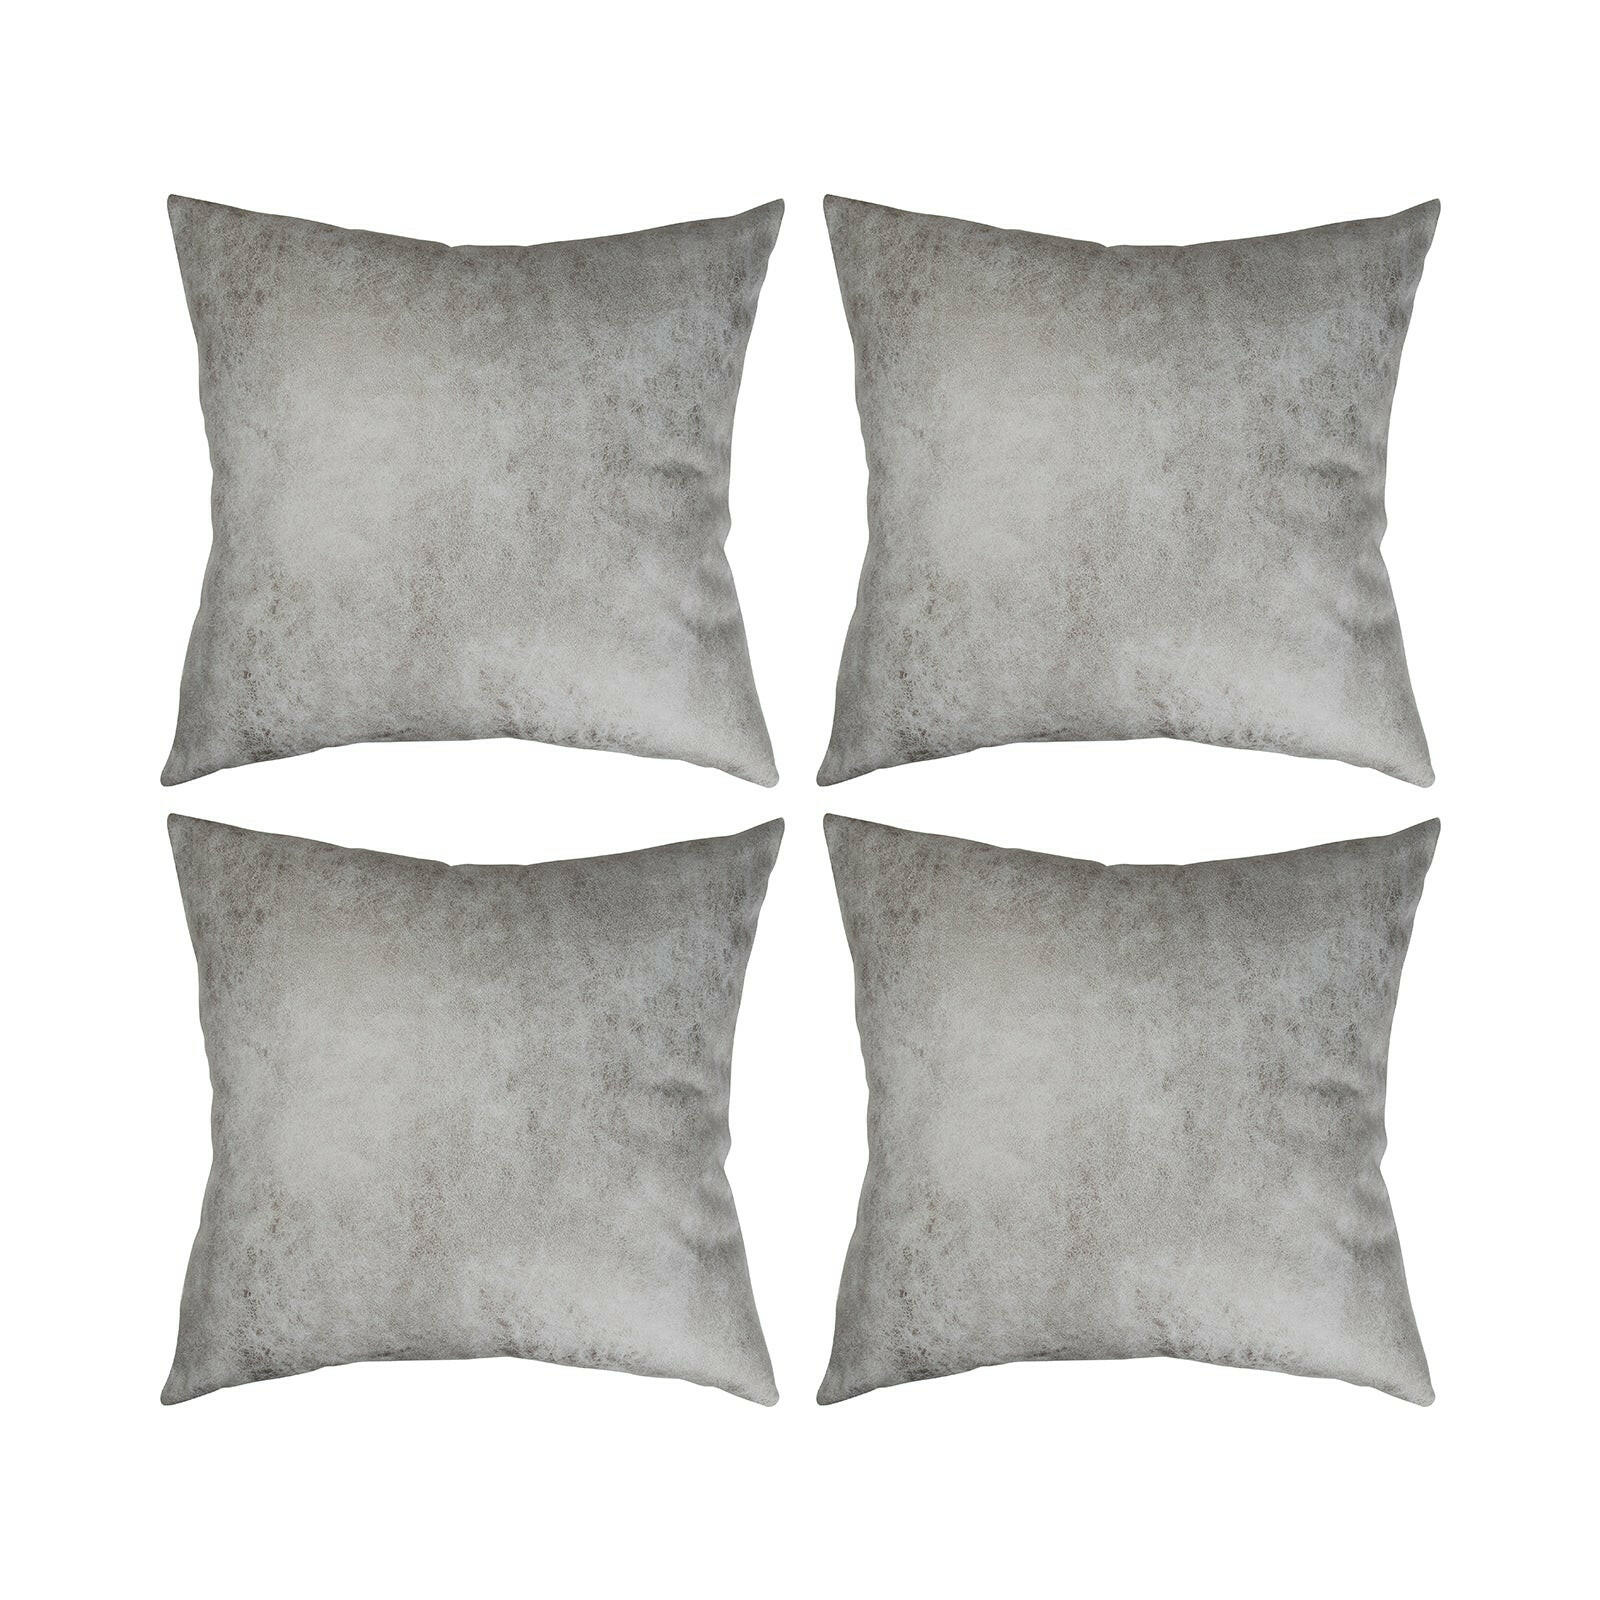 Grey Vegan Leather Sublimation Pillow Cases - 4 Pack.